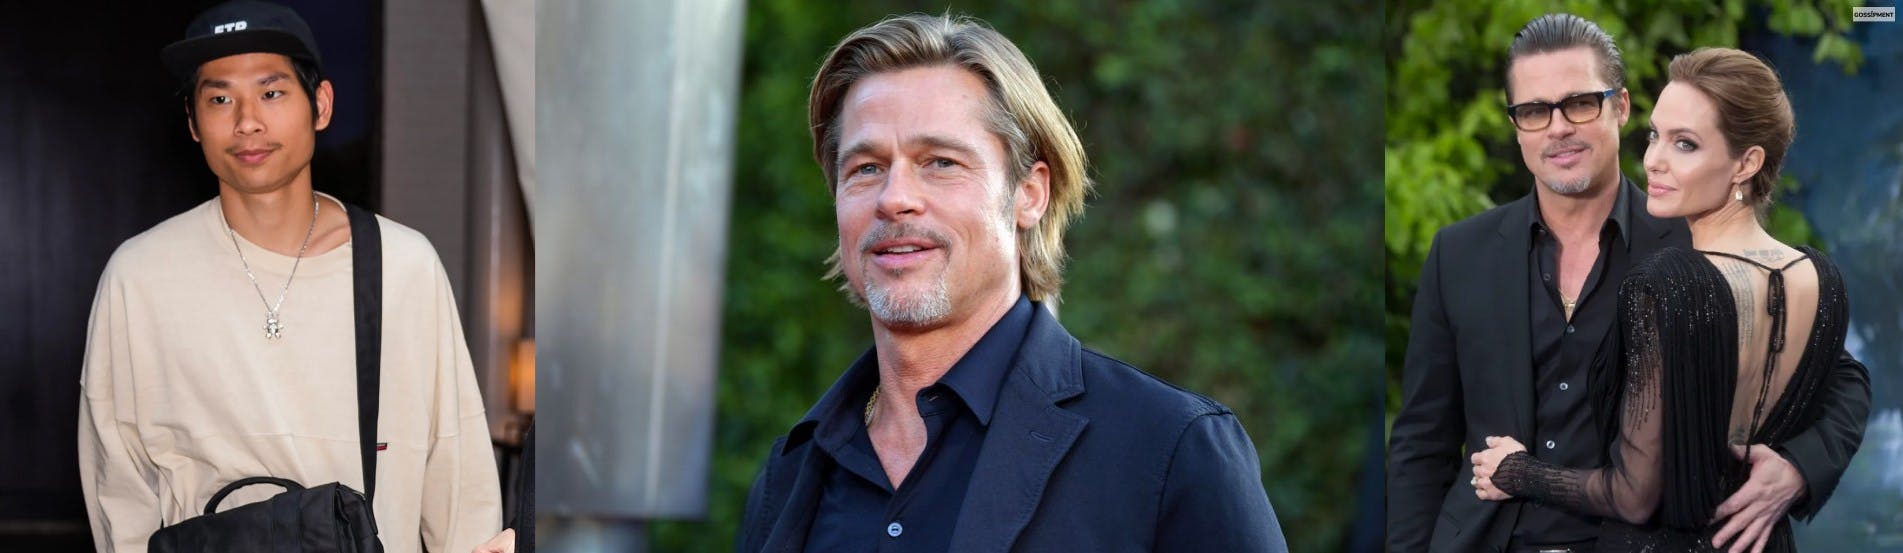 Cover Image for Pax Jolie-pitt Slams Brad Pitt, Calls Him ‘Despicable Person’ In Social Media Rant For Father’s Day 2020